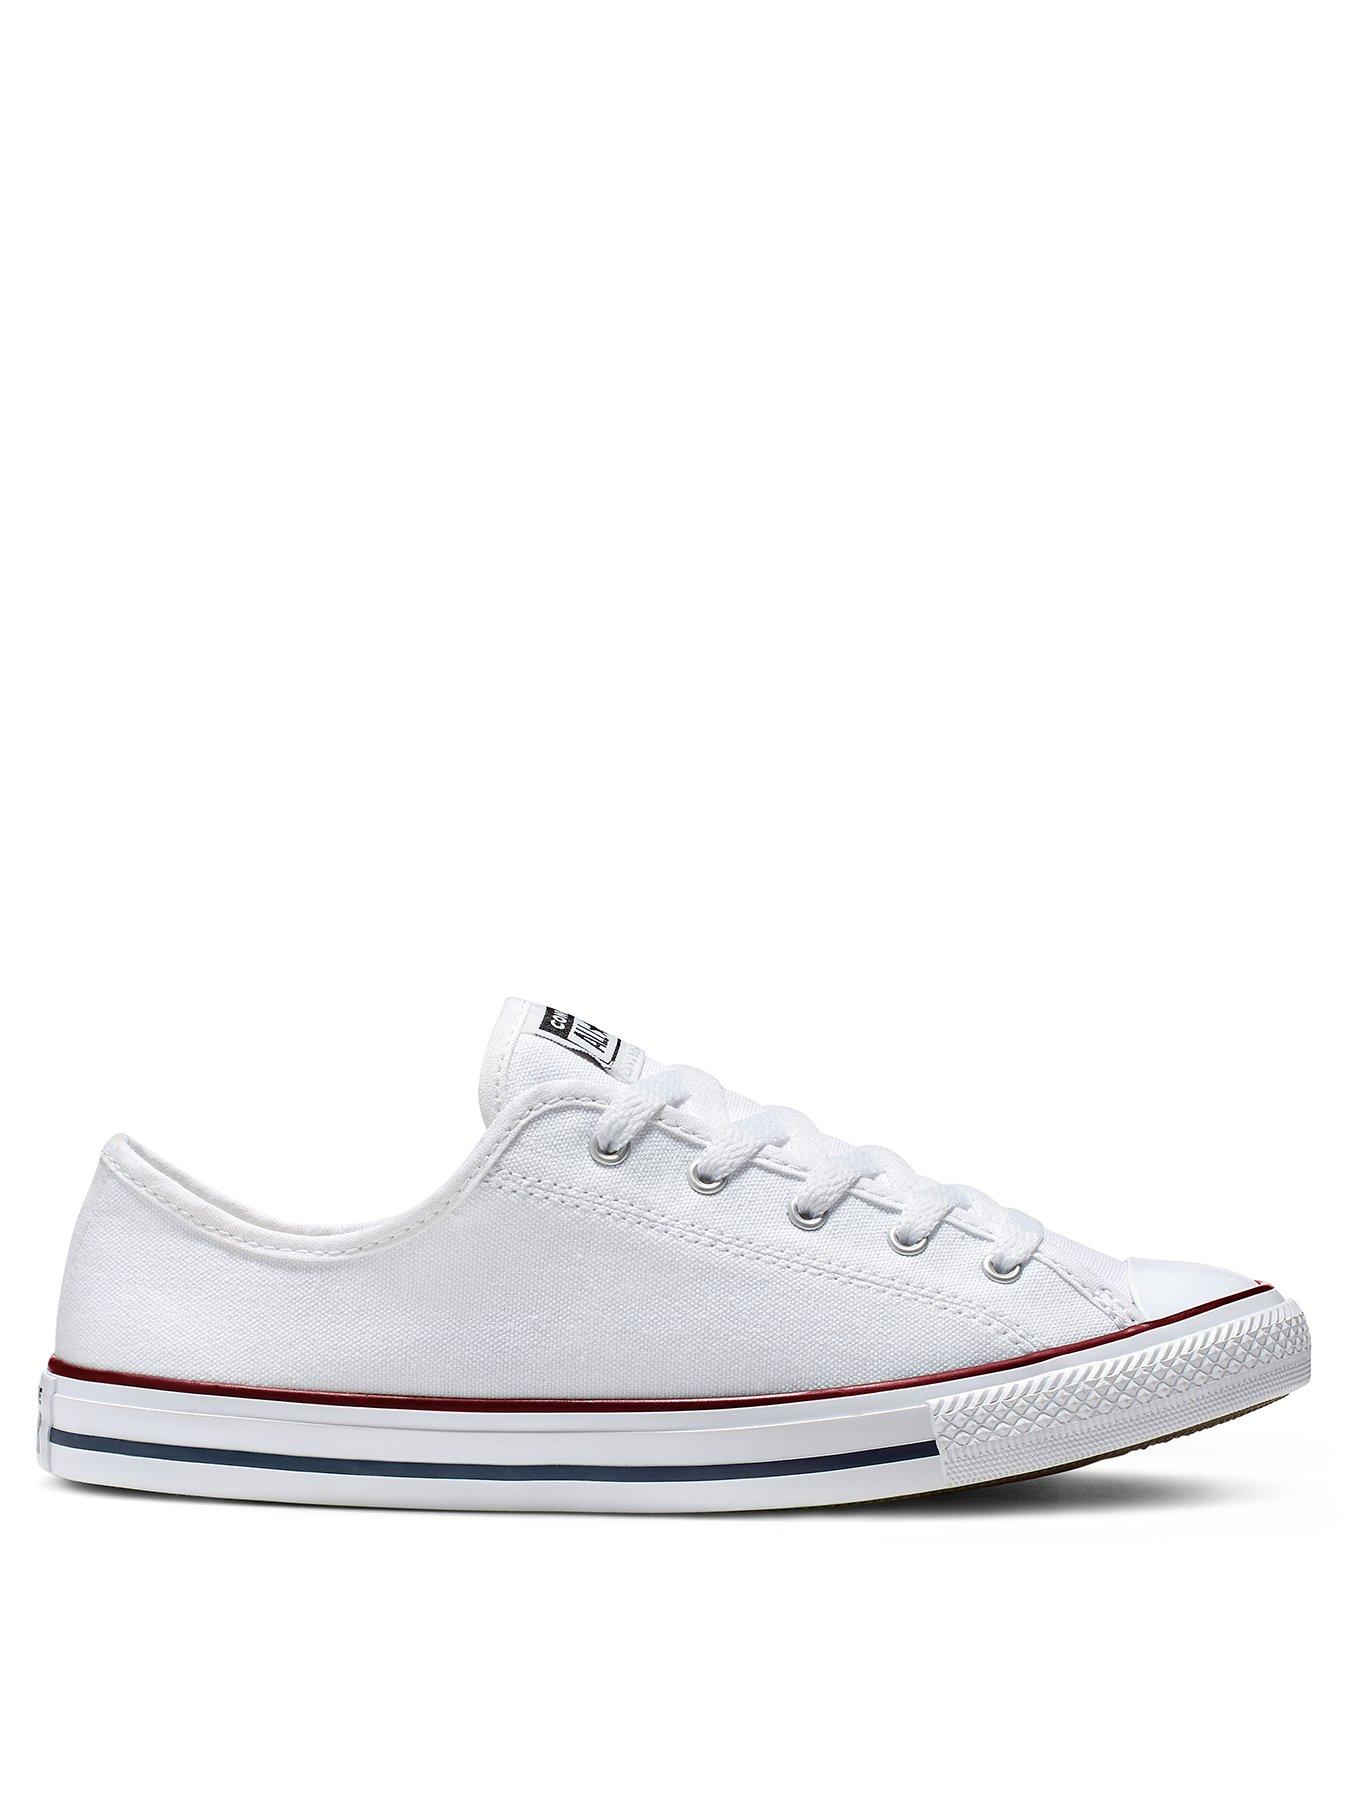 converse all star dainty ox leather